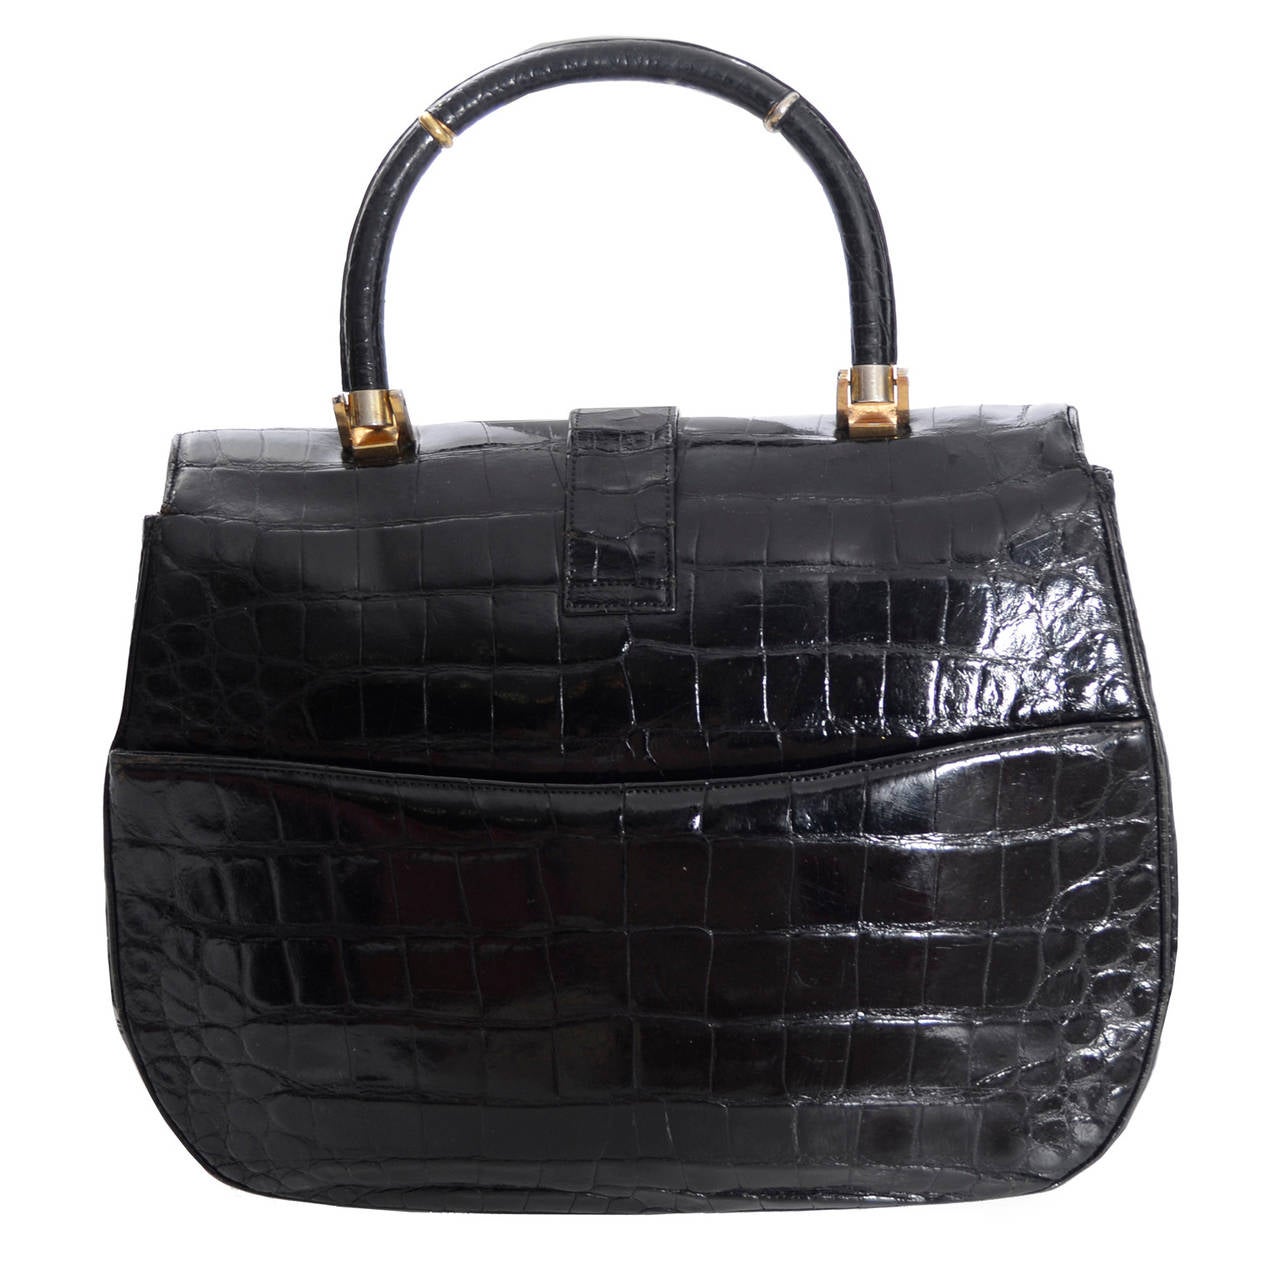 Gorgeous Lucille de Paris vintage alligator handbag with alligator skin covered handle and slide front closure. Made in the US, this bag measures 12